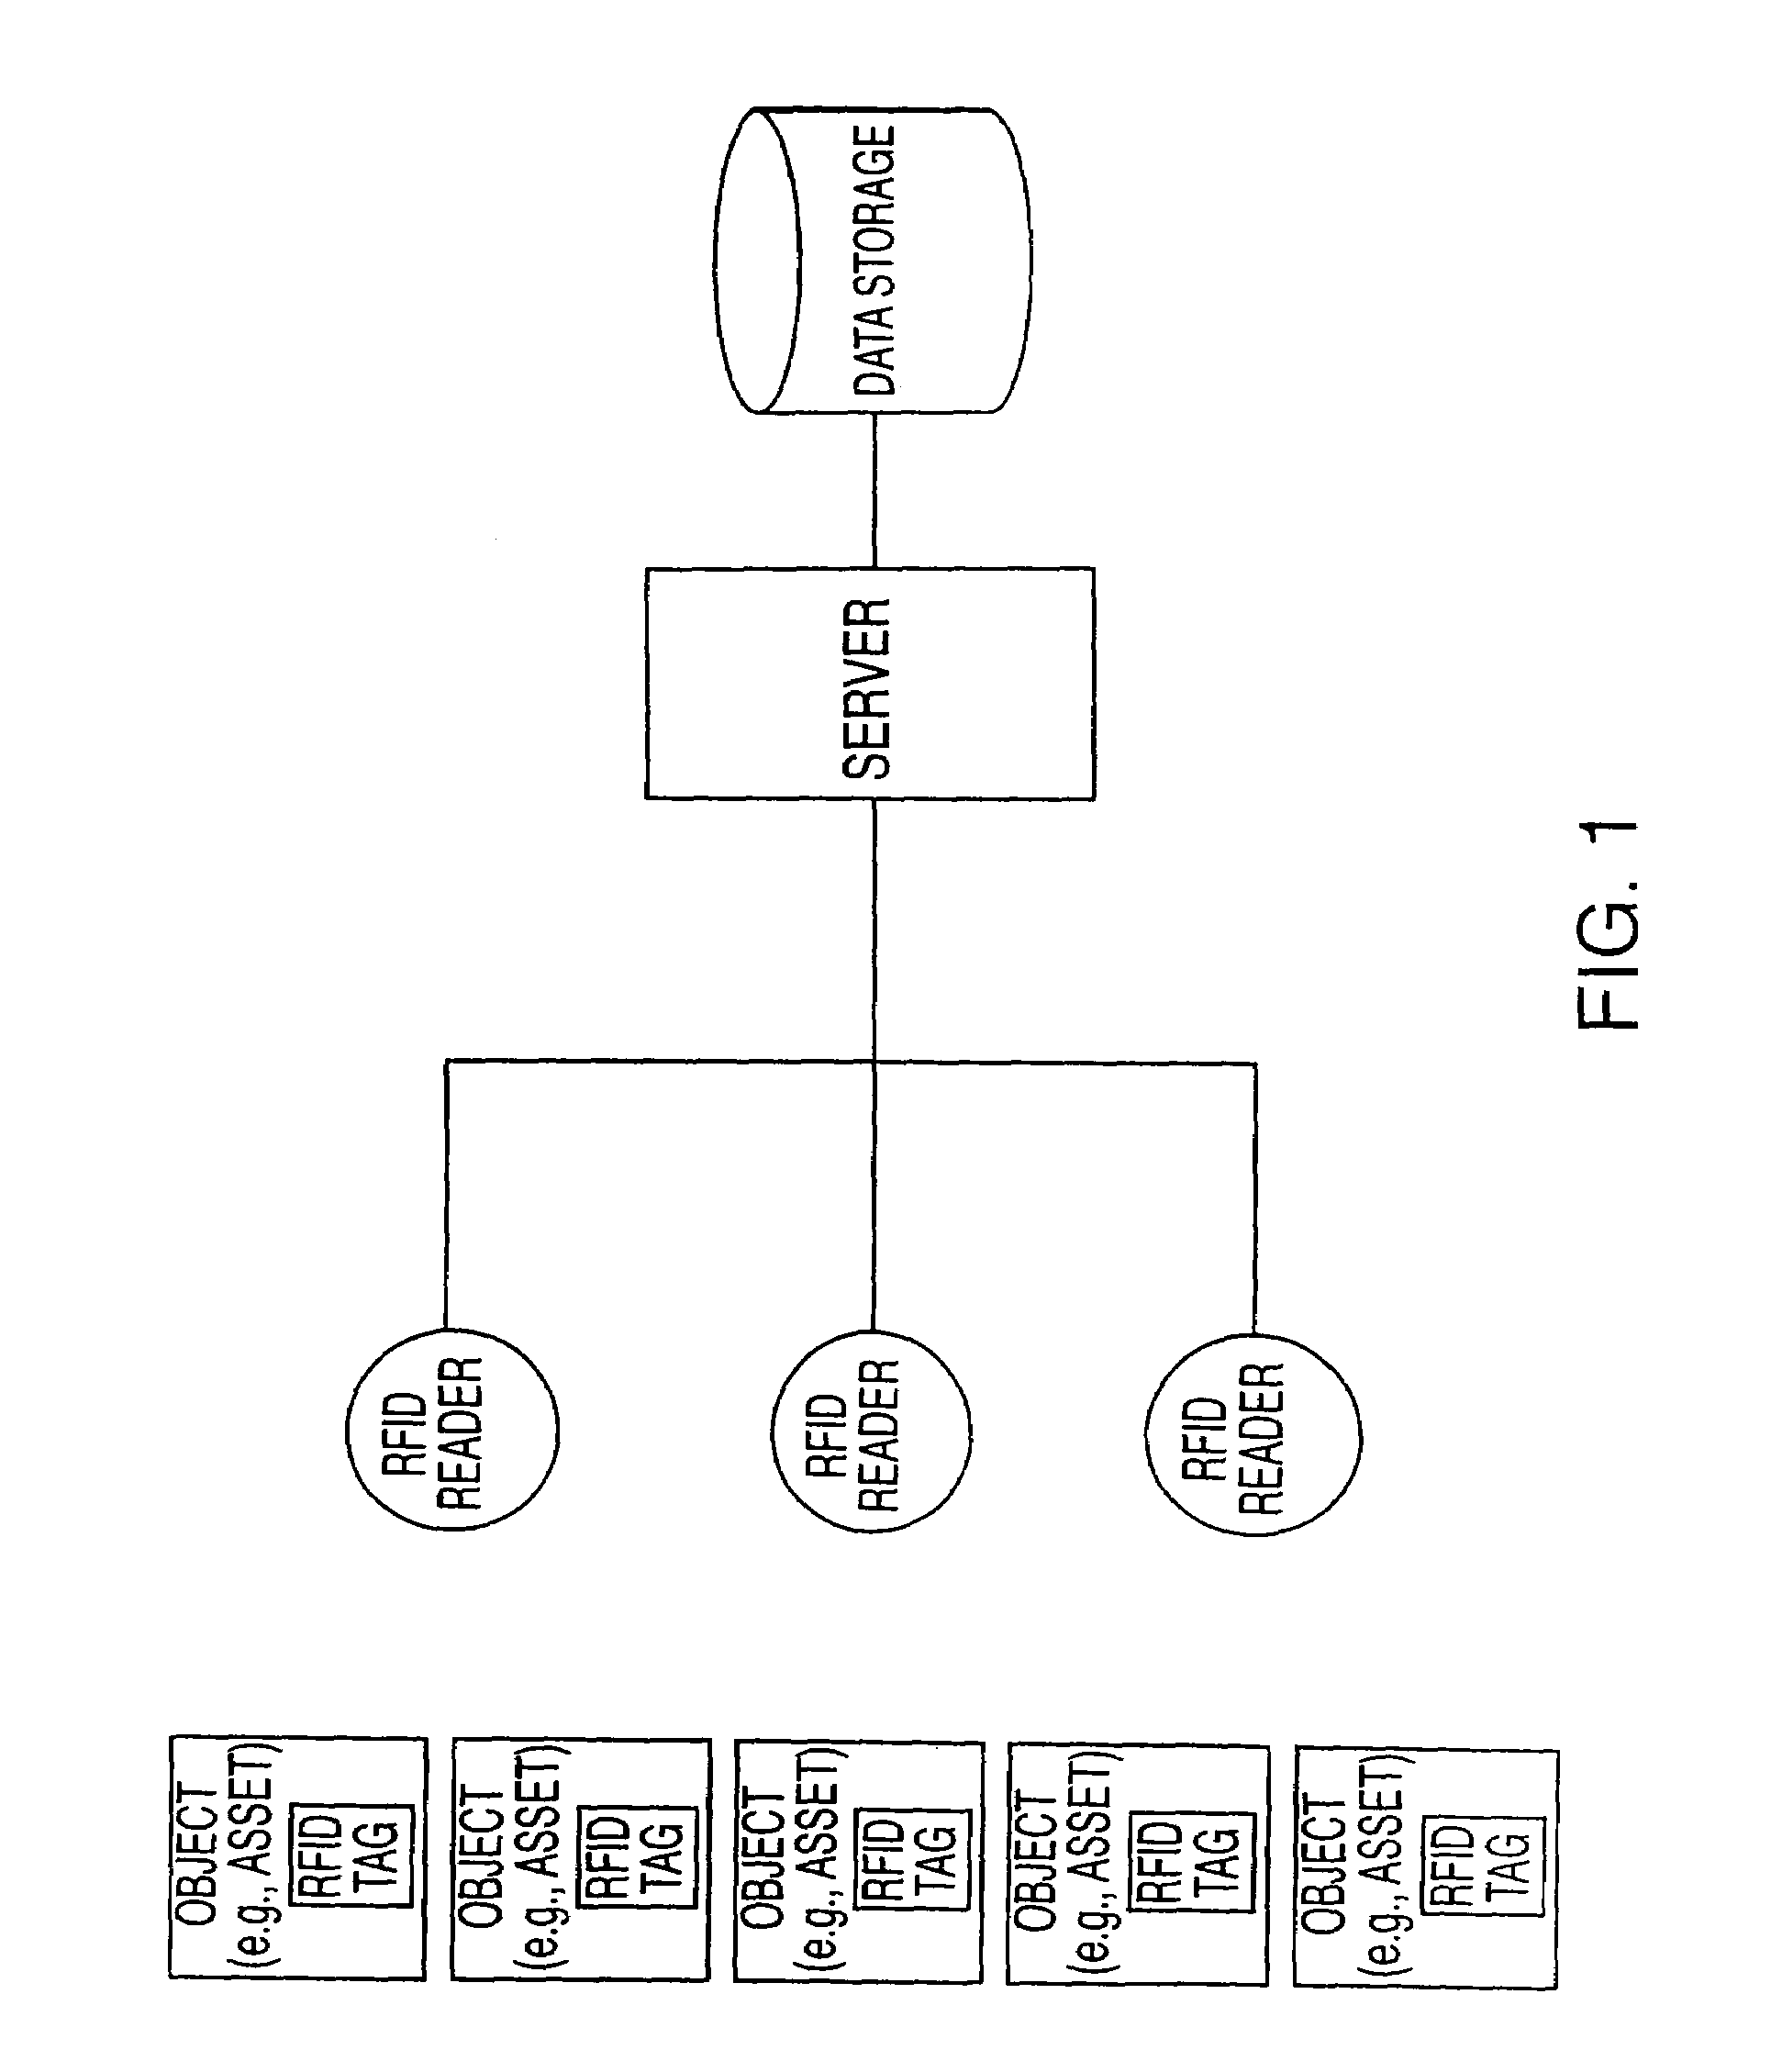 Battery management system with predictive failure analysis